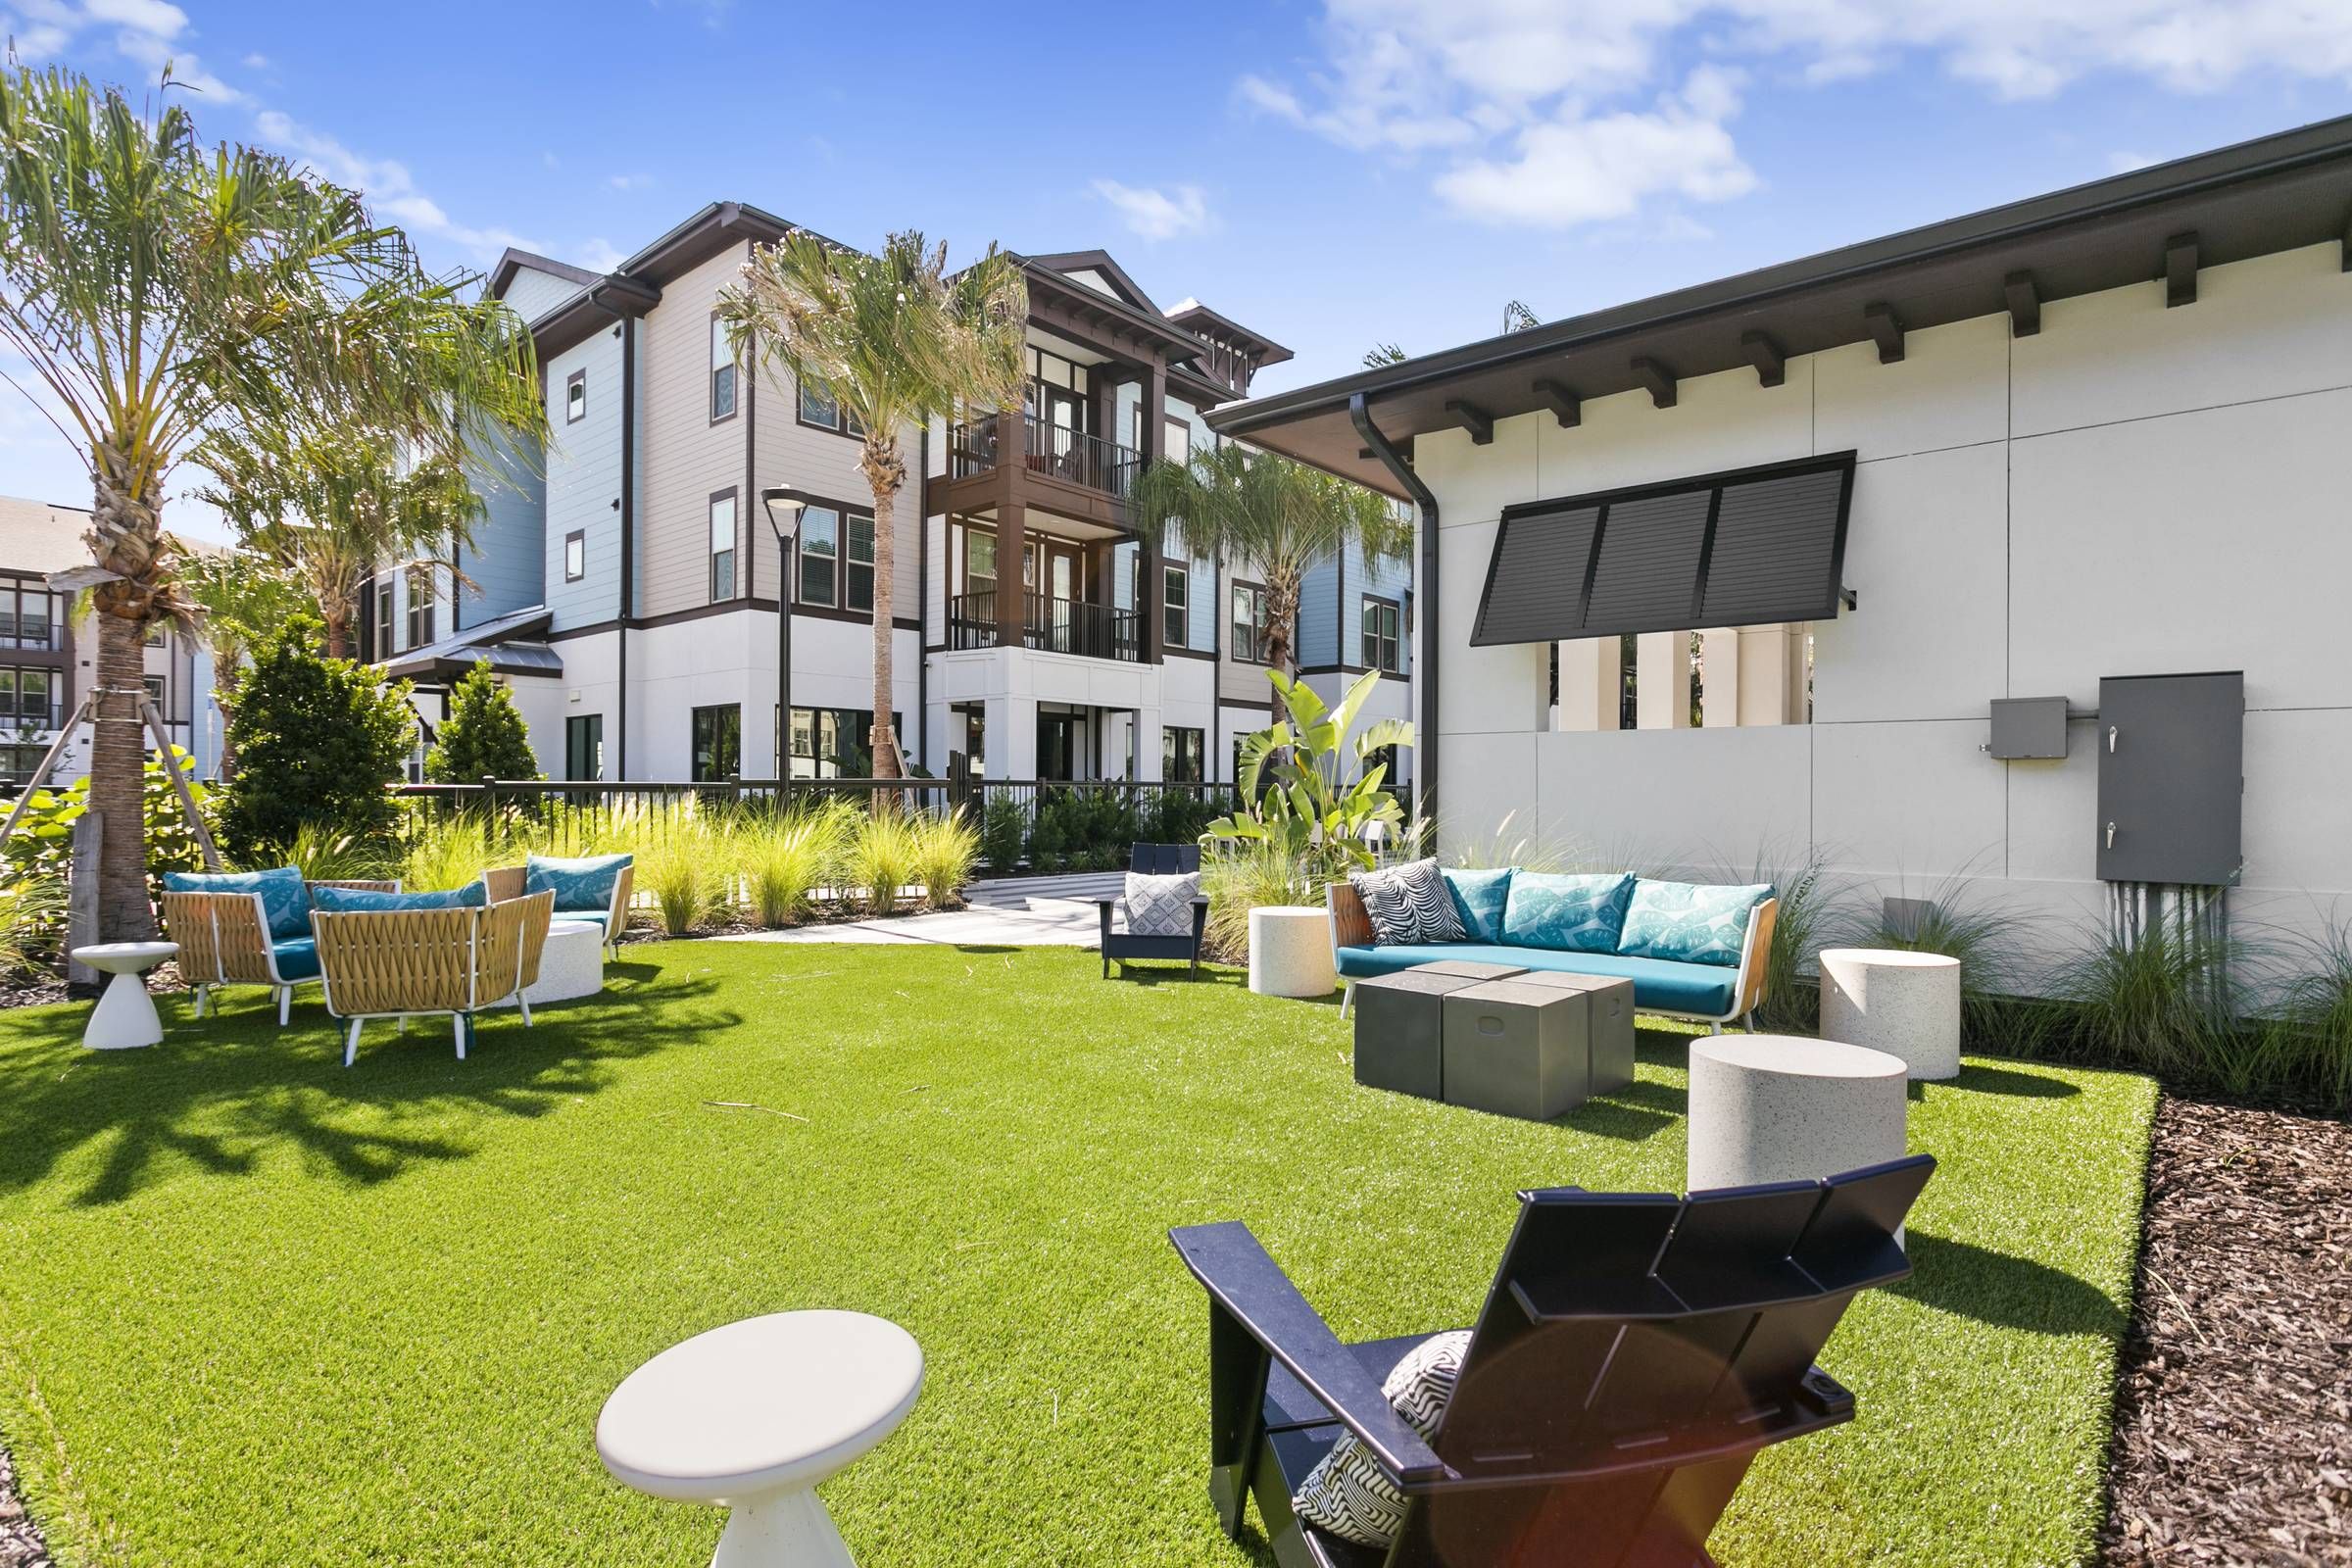 Alta Clearwater's communal backyard features a neatly manicured lawn with contemporary outdoor furniture, perfect for social gatherings.